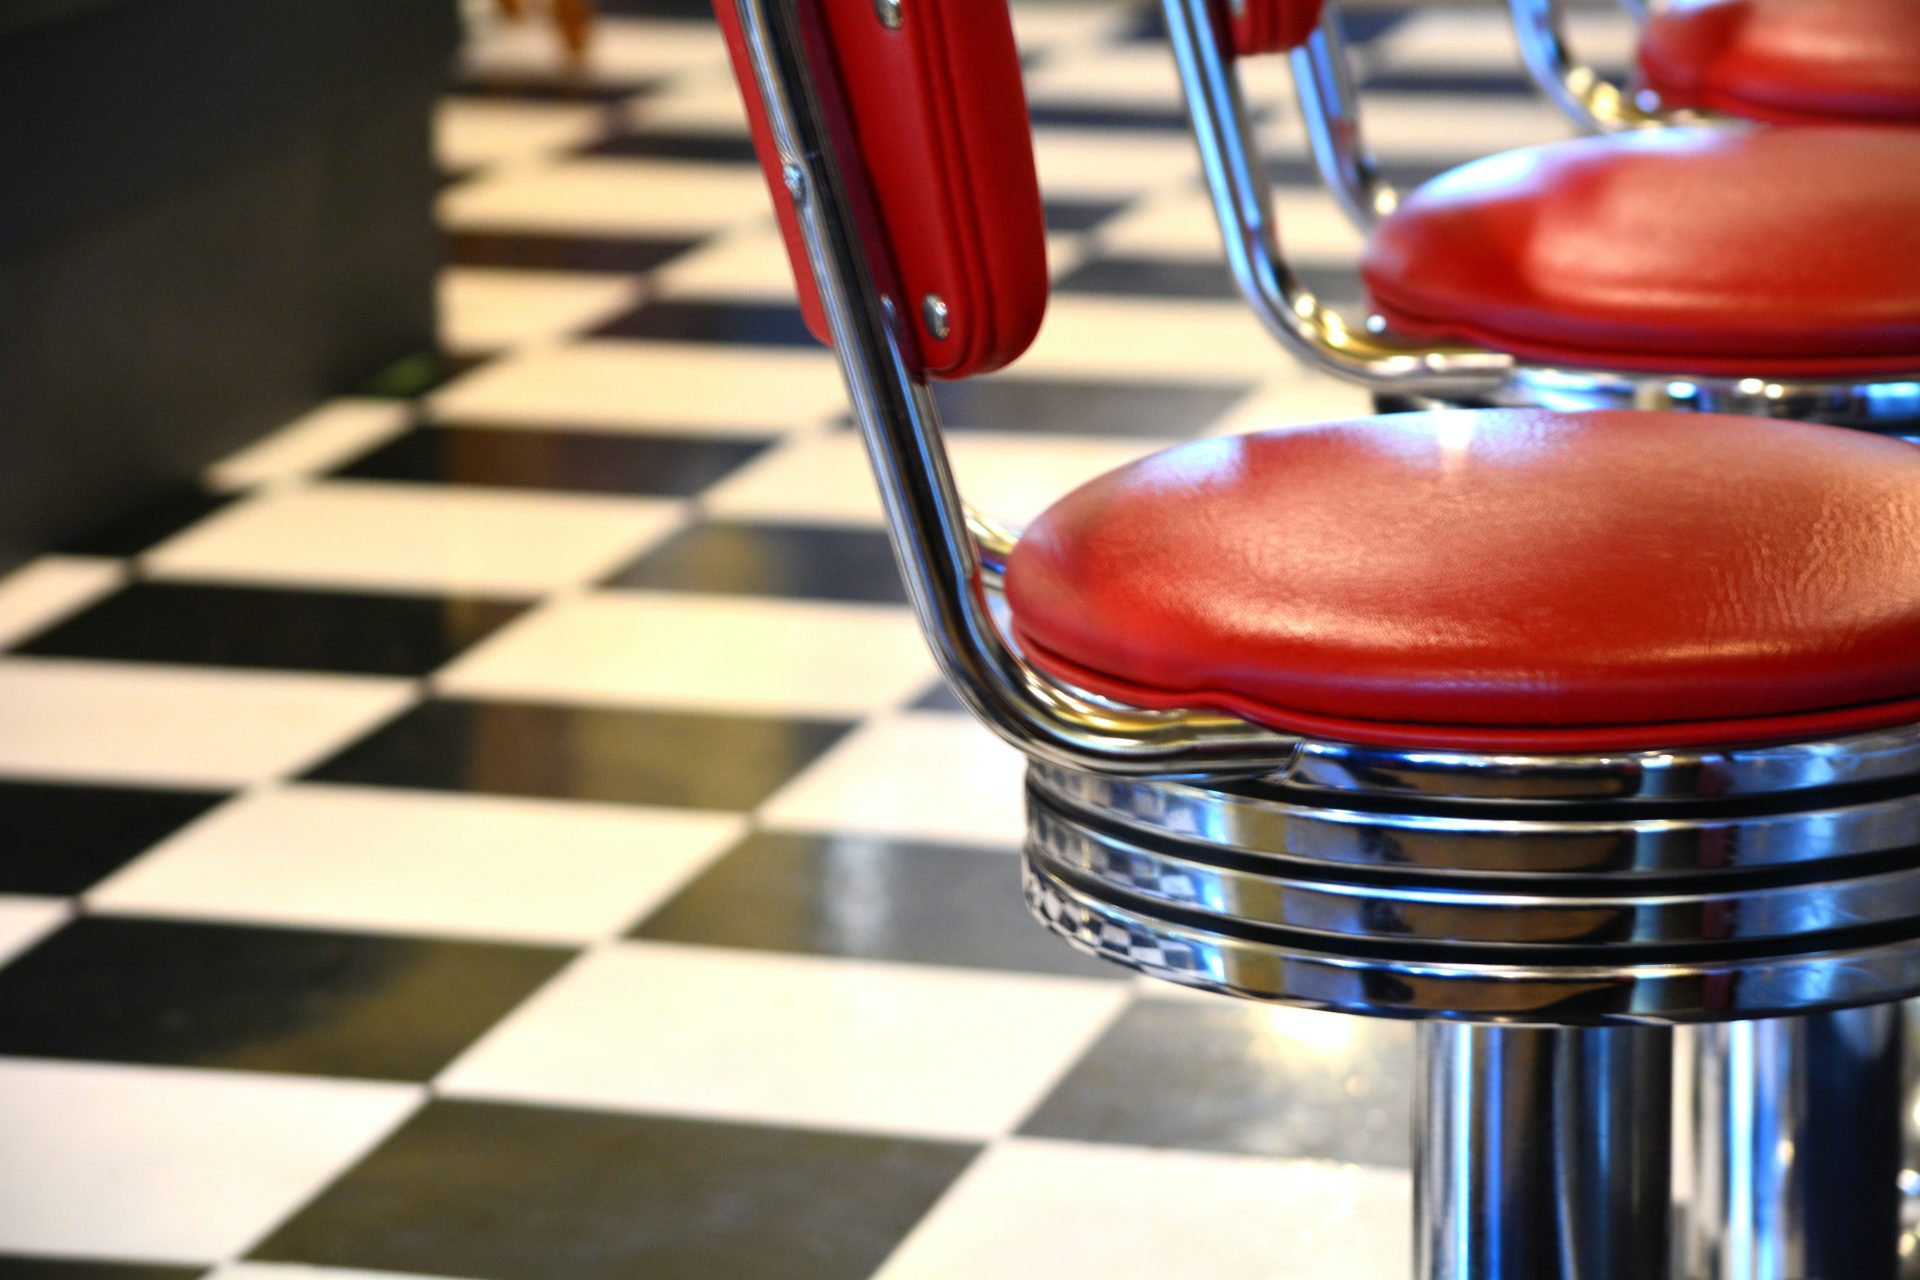 American diner style seating with checkerboard pattern flooring. 